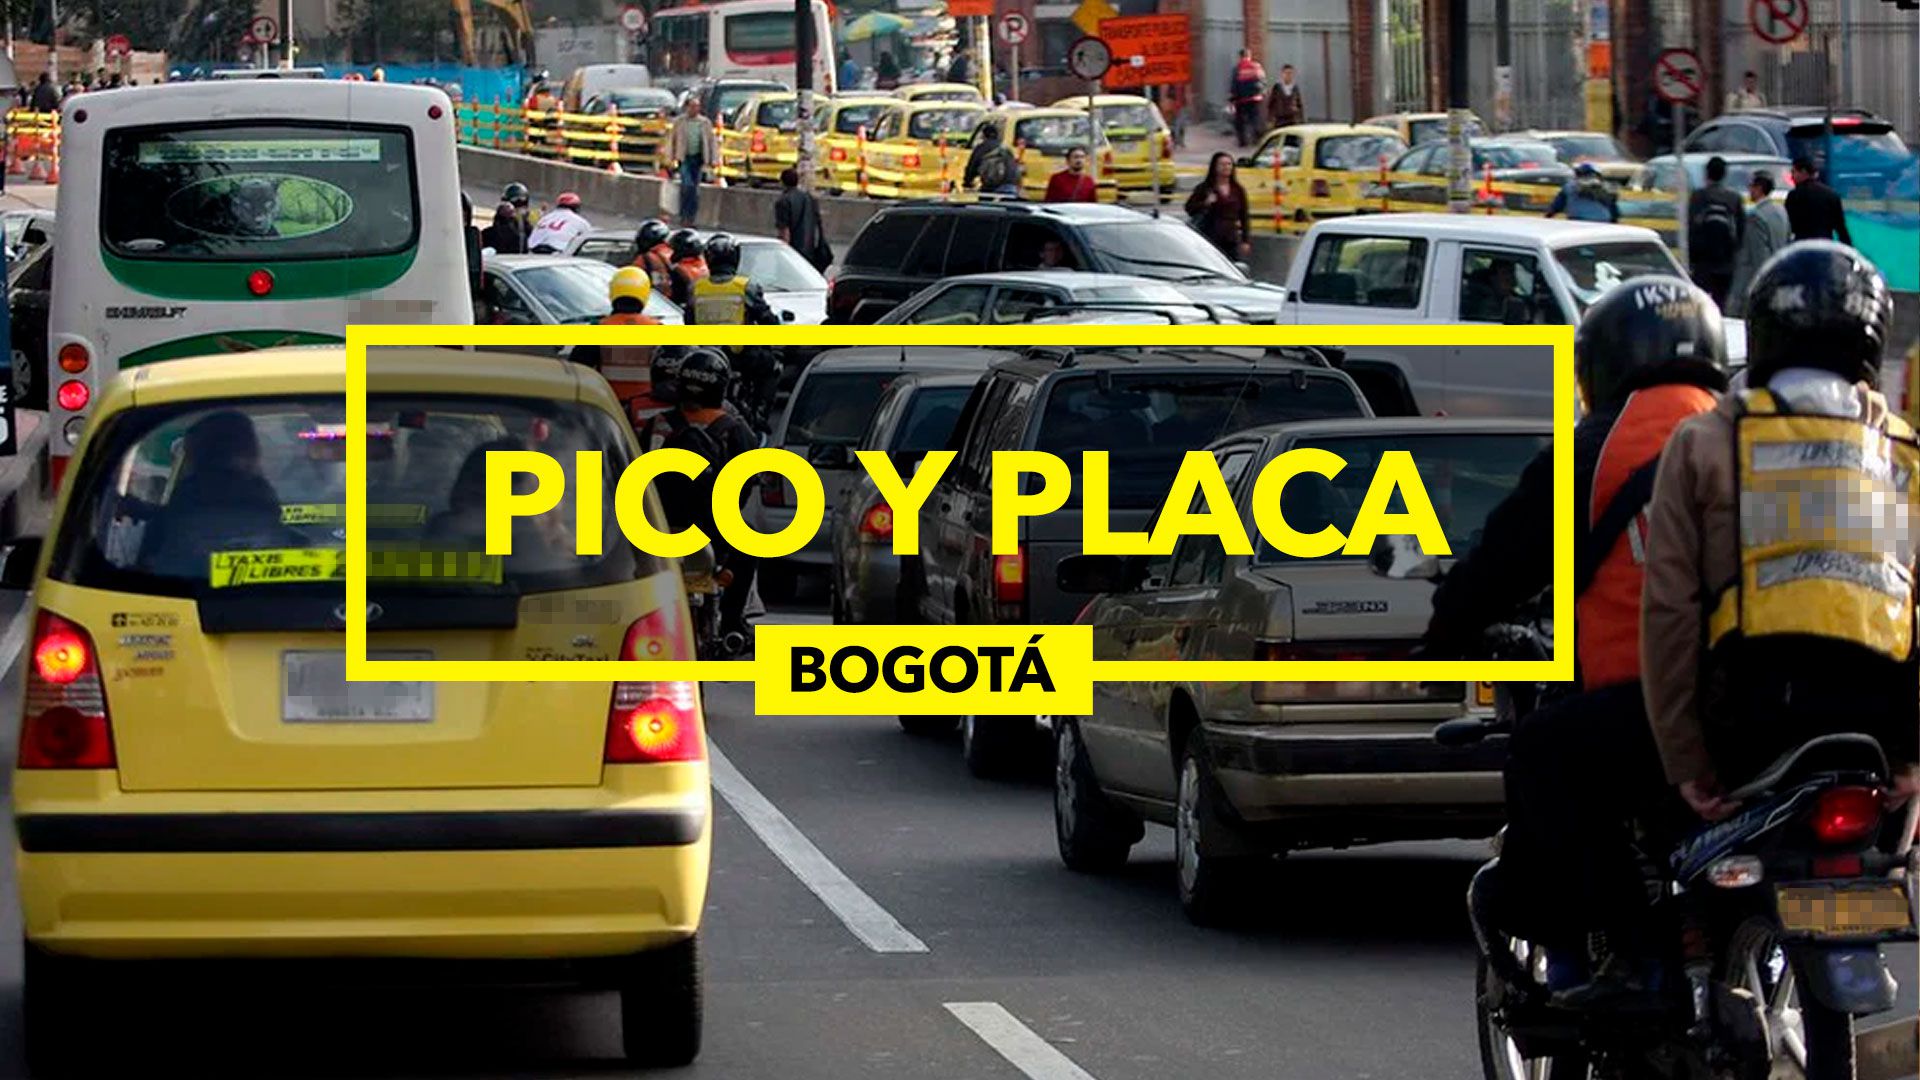 Pico y Placa has been active in the country's capital for more than 20 years (Infobae / Jovani Pérez)